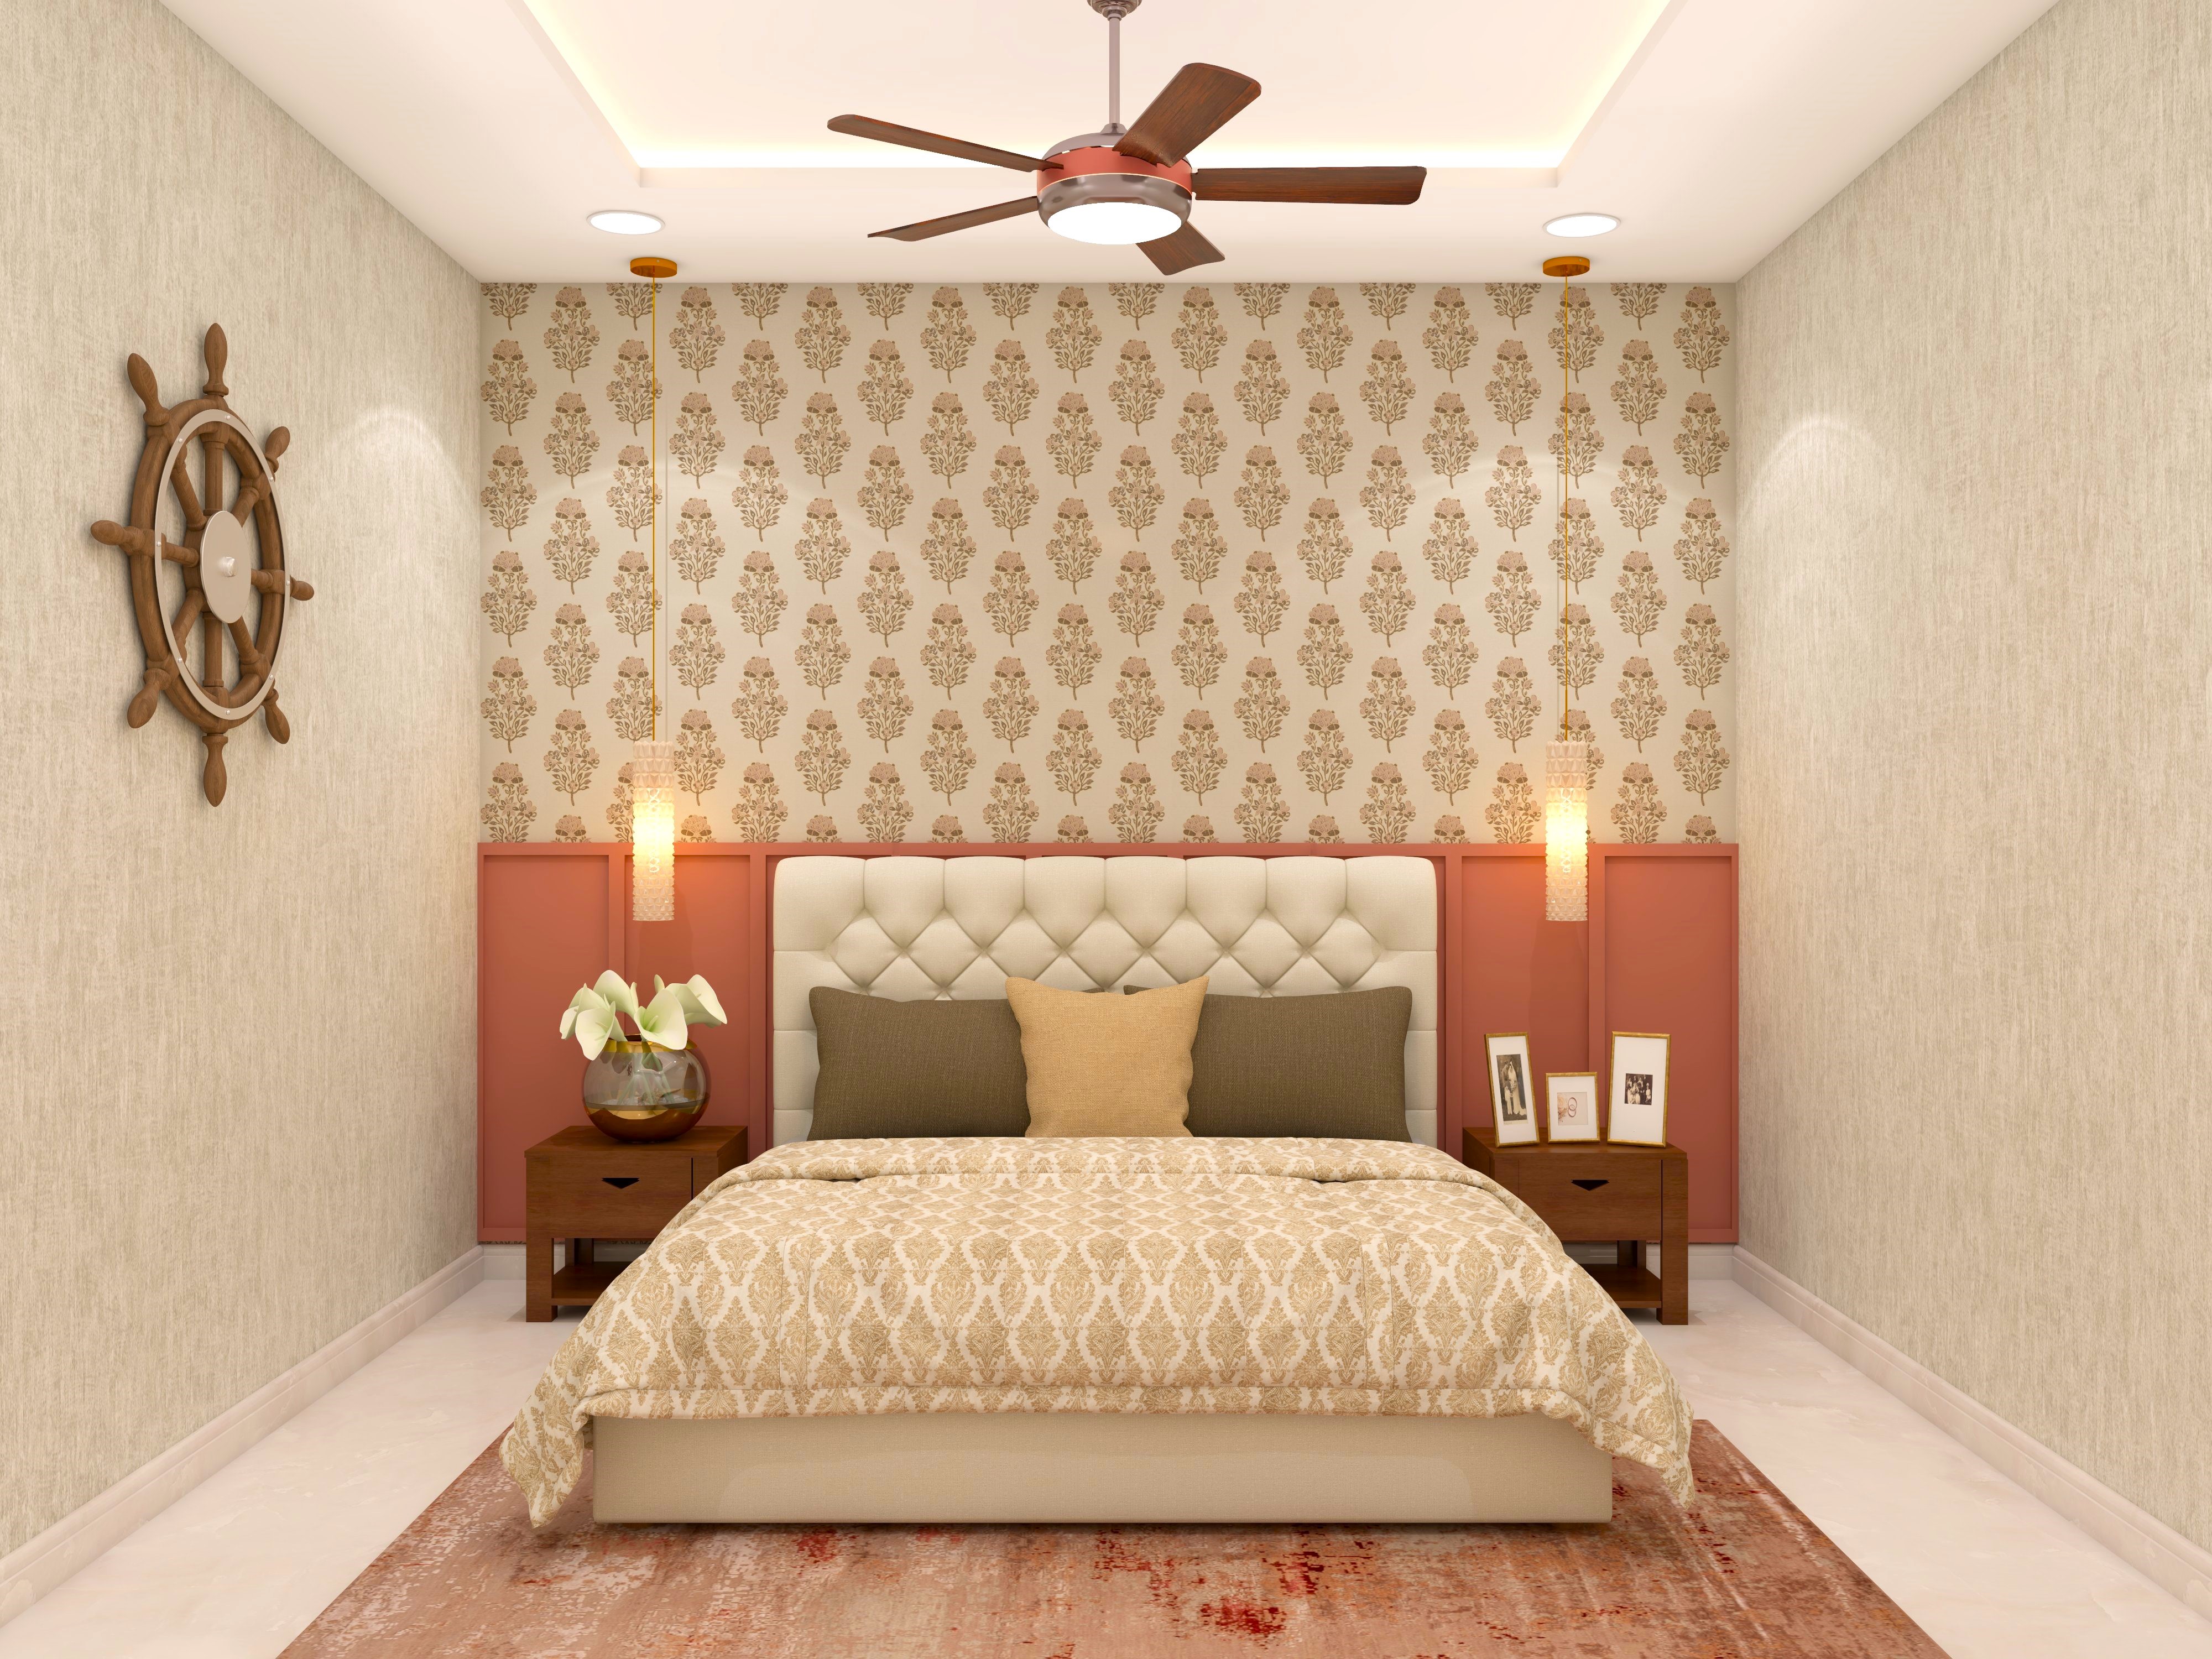 Guest bedroom wall design with traditional wallpaper and paneling-Beautiful Homes